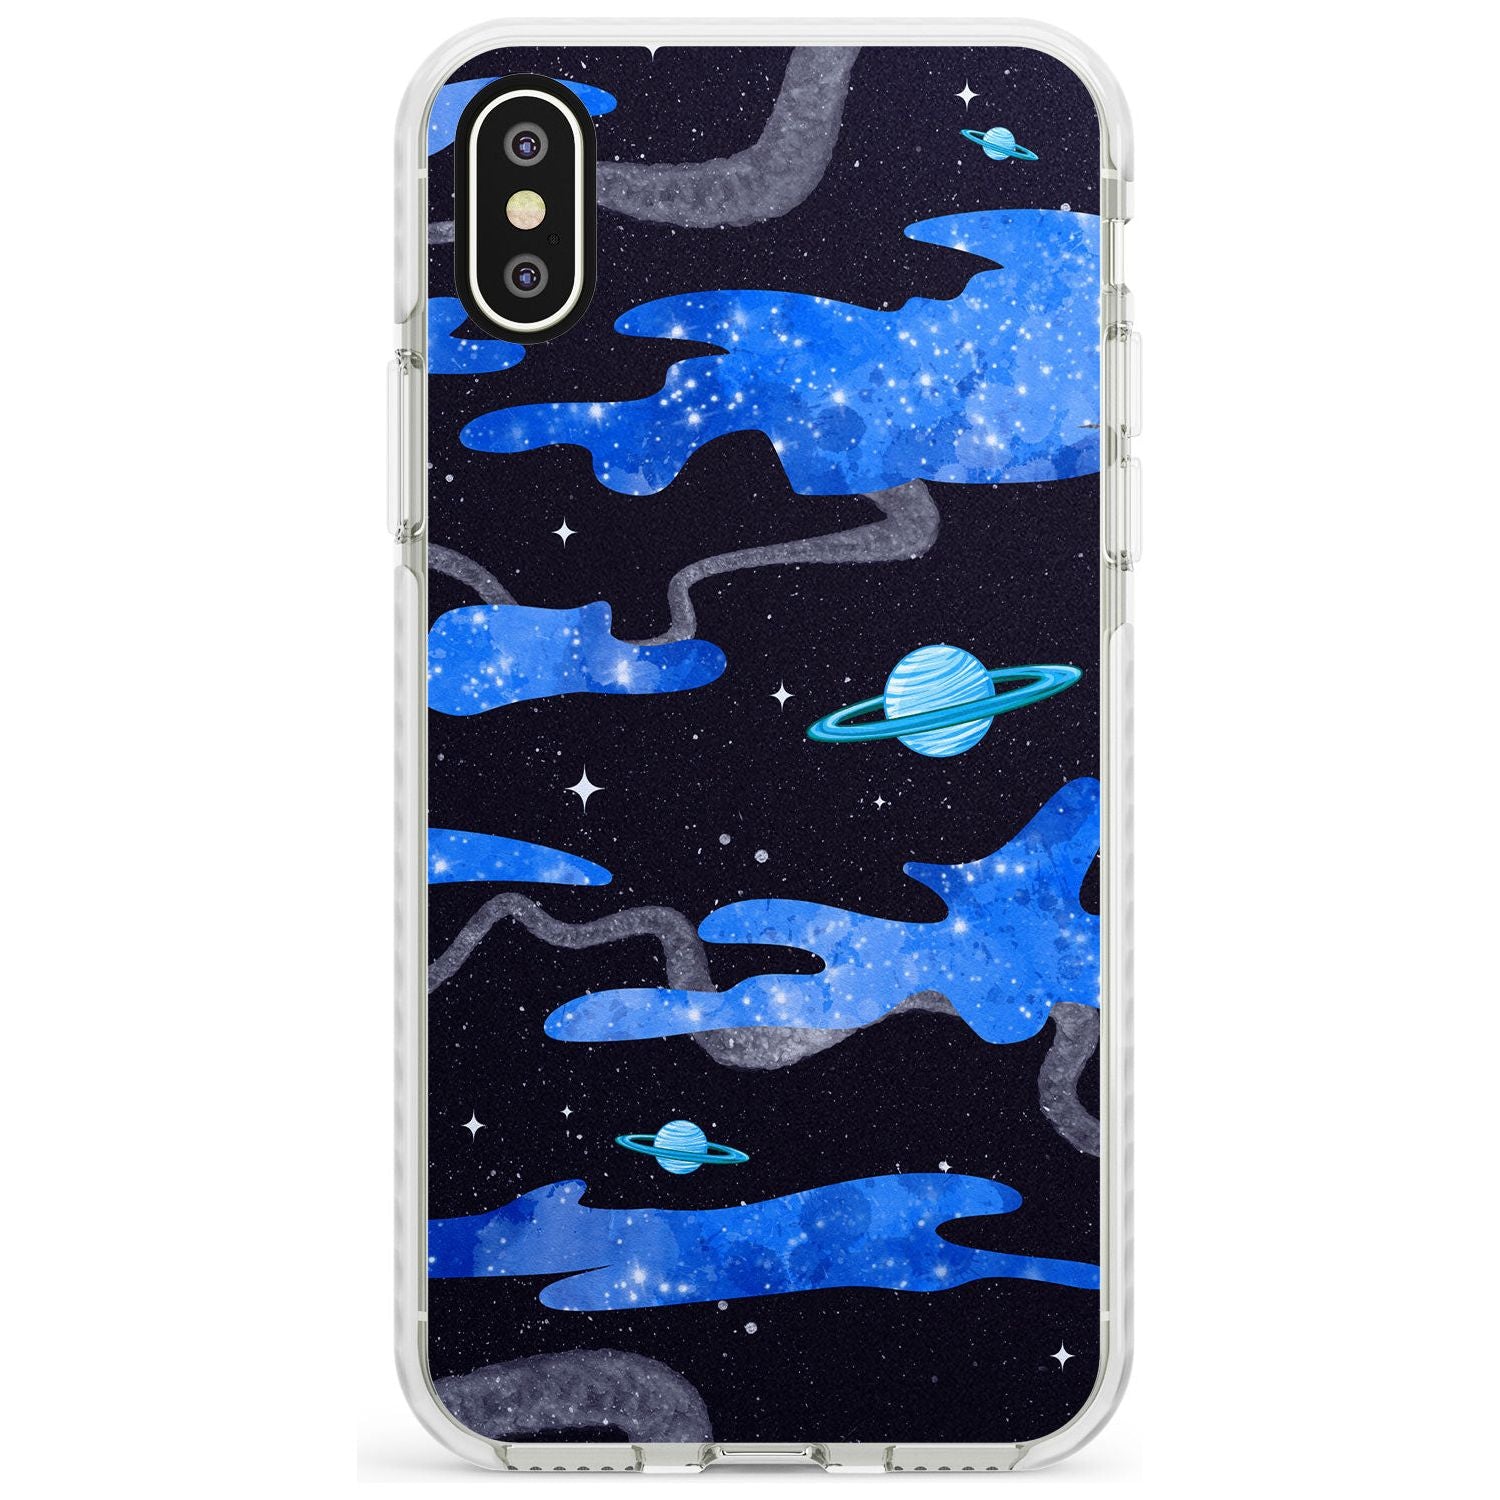 Blue Galaxy Impact Phone Case for iPhone X XS Max XR